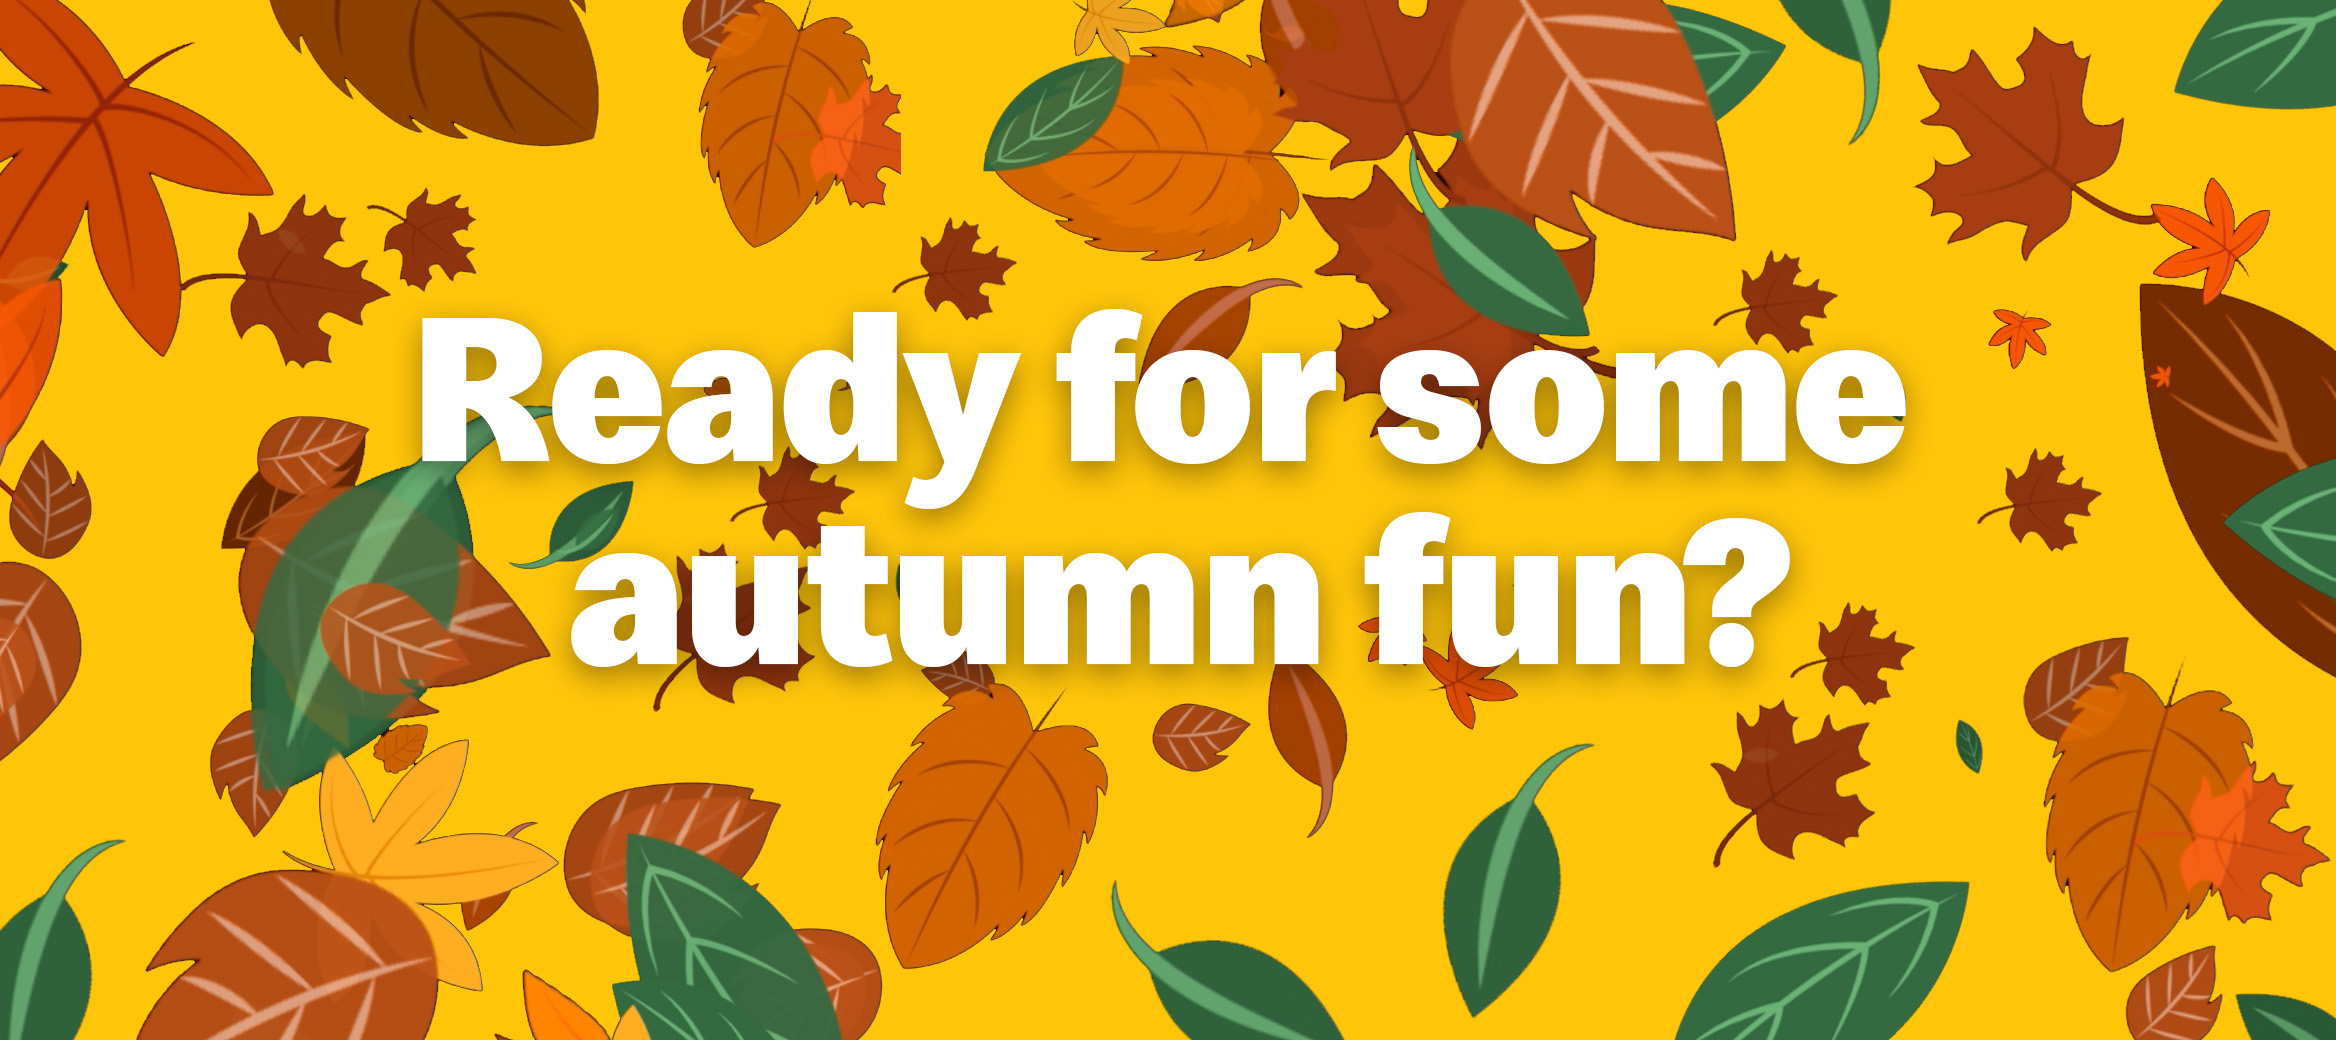 Different coloured leaves on a yellow background and a title that reads “Ready for some autumn fun?”